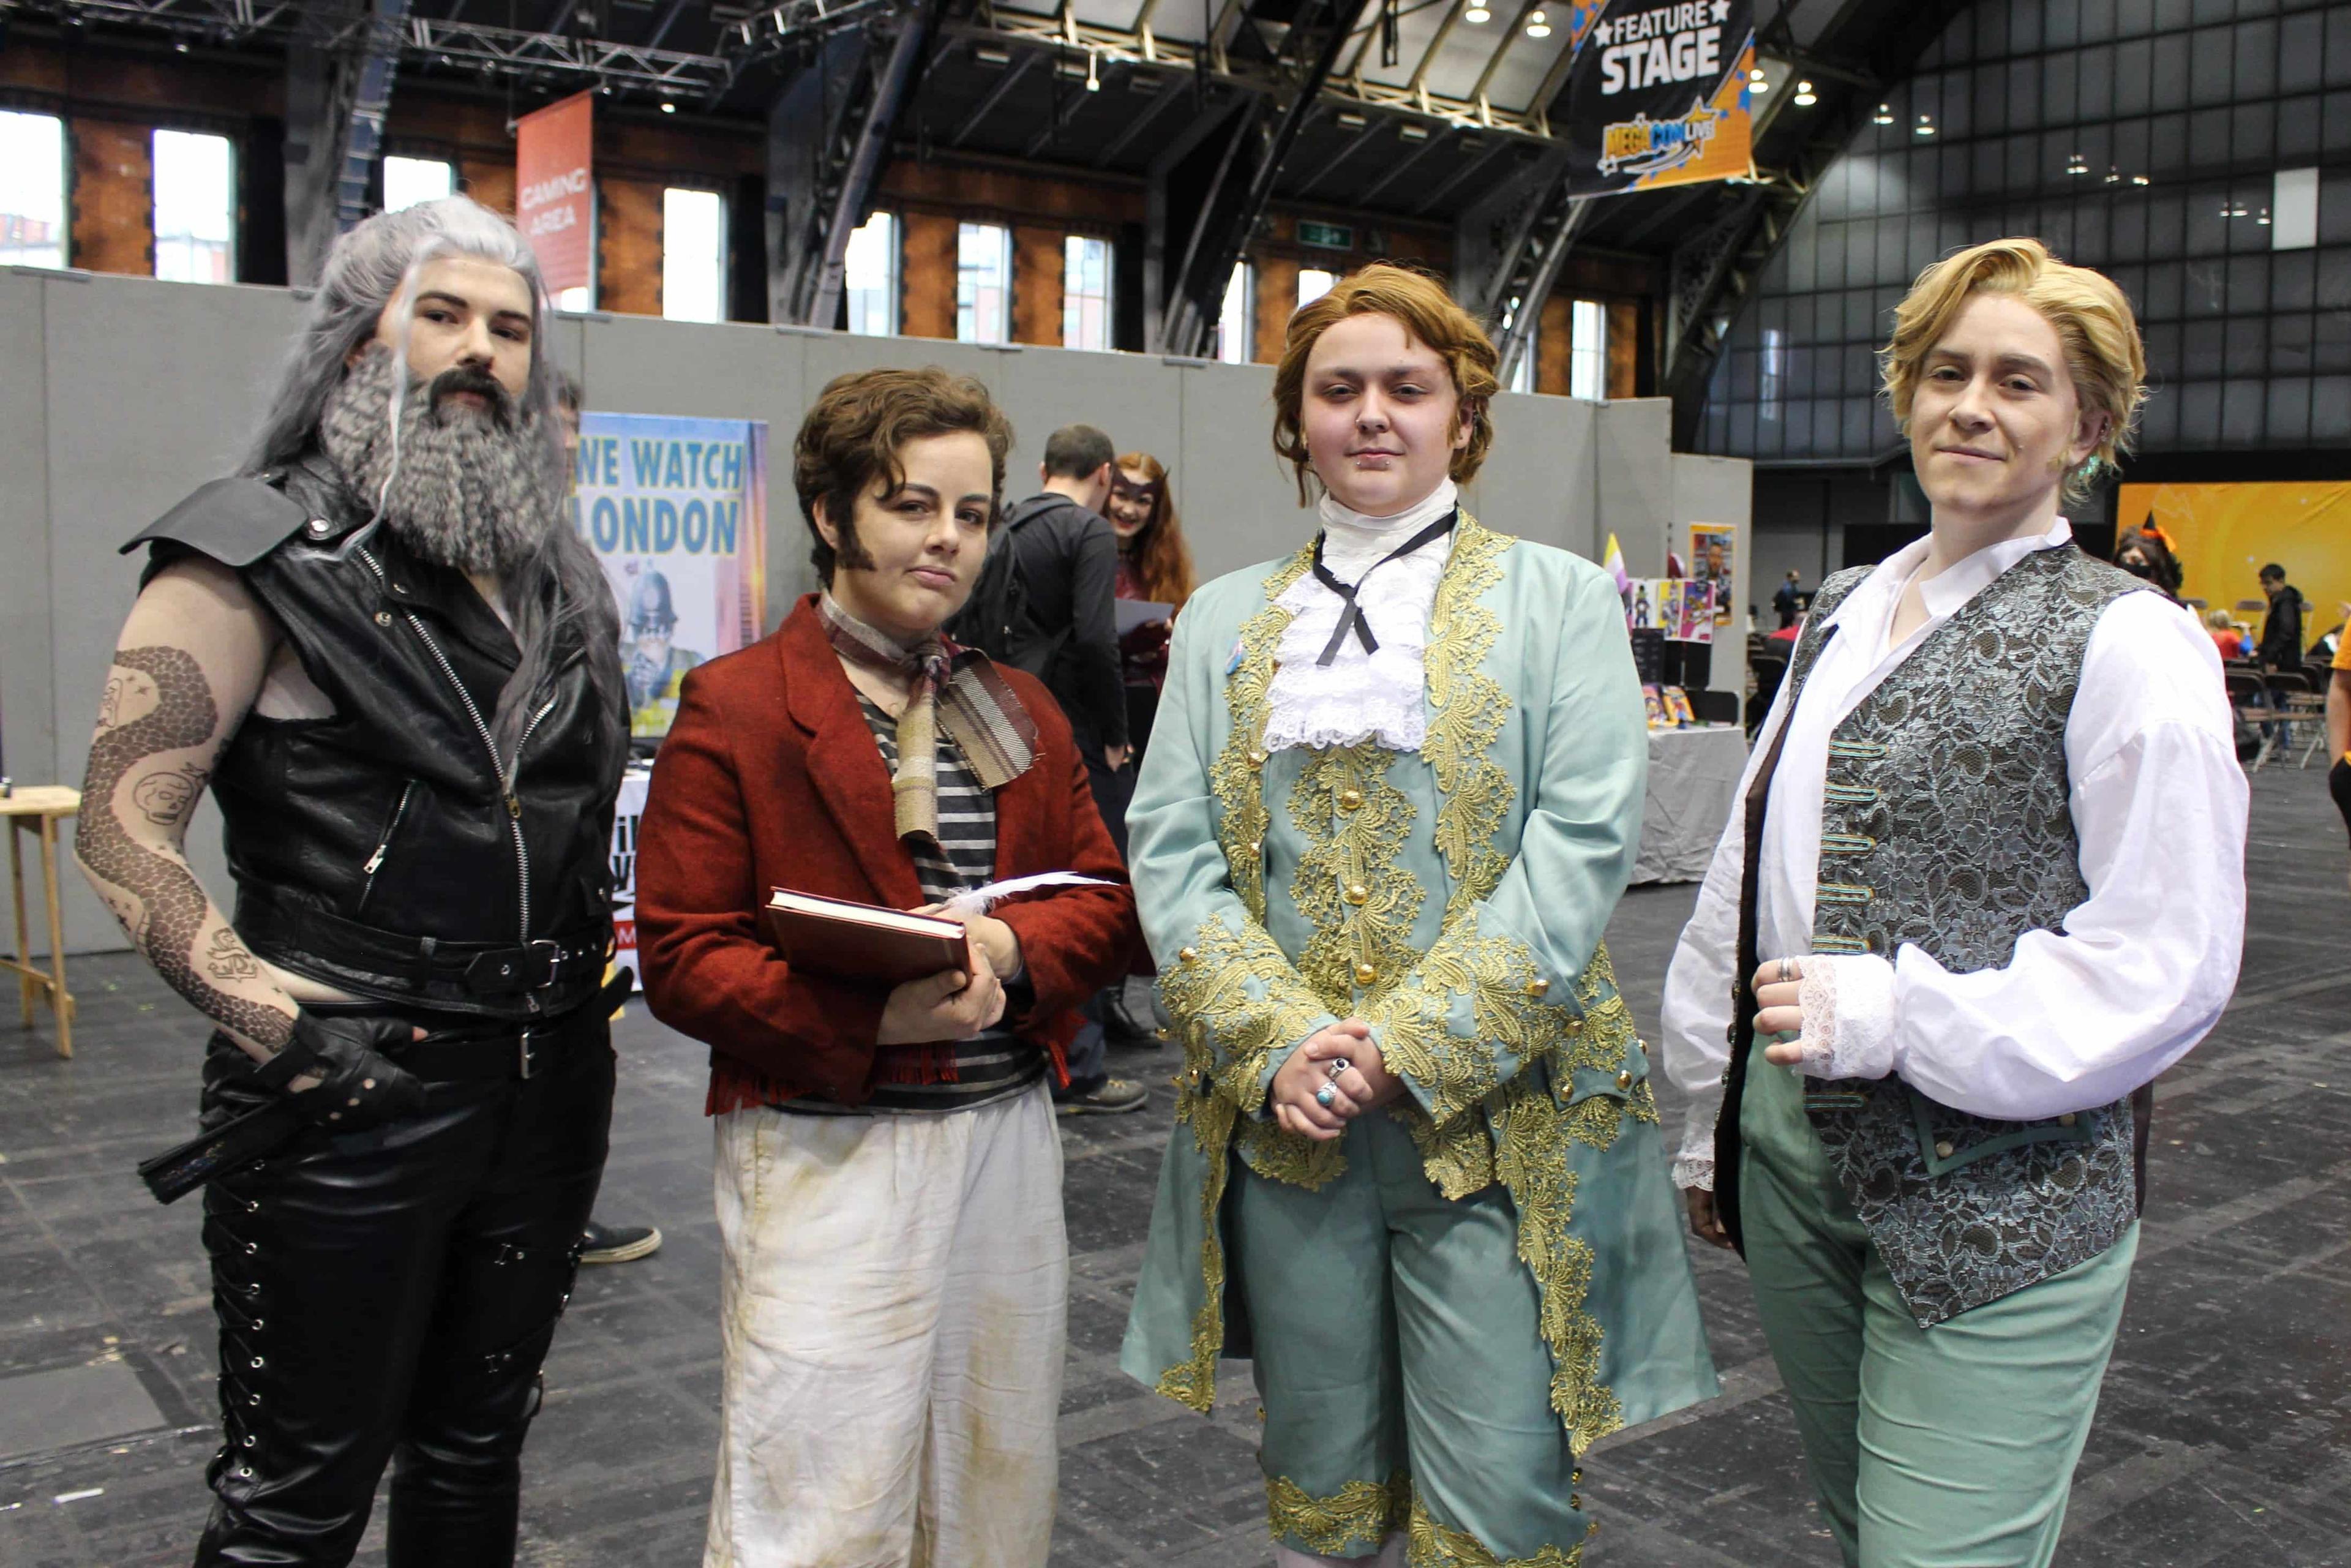 Blackbeard/Ed, Lucius, Stede Bonnet and another Stede Bonnet (Our Flag Means Death) cosplay